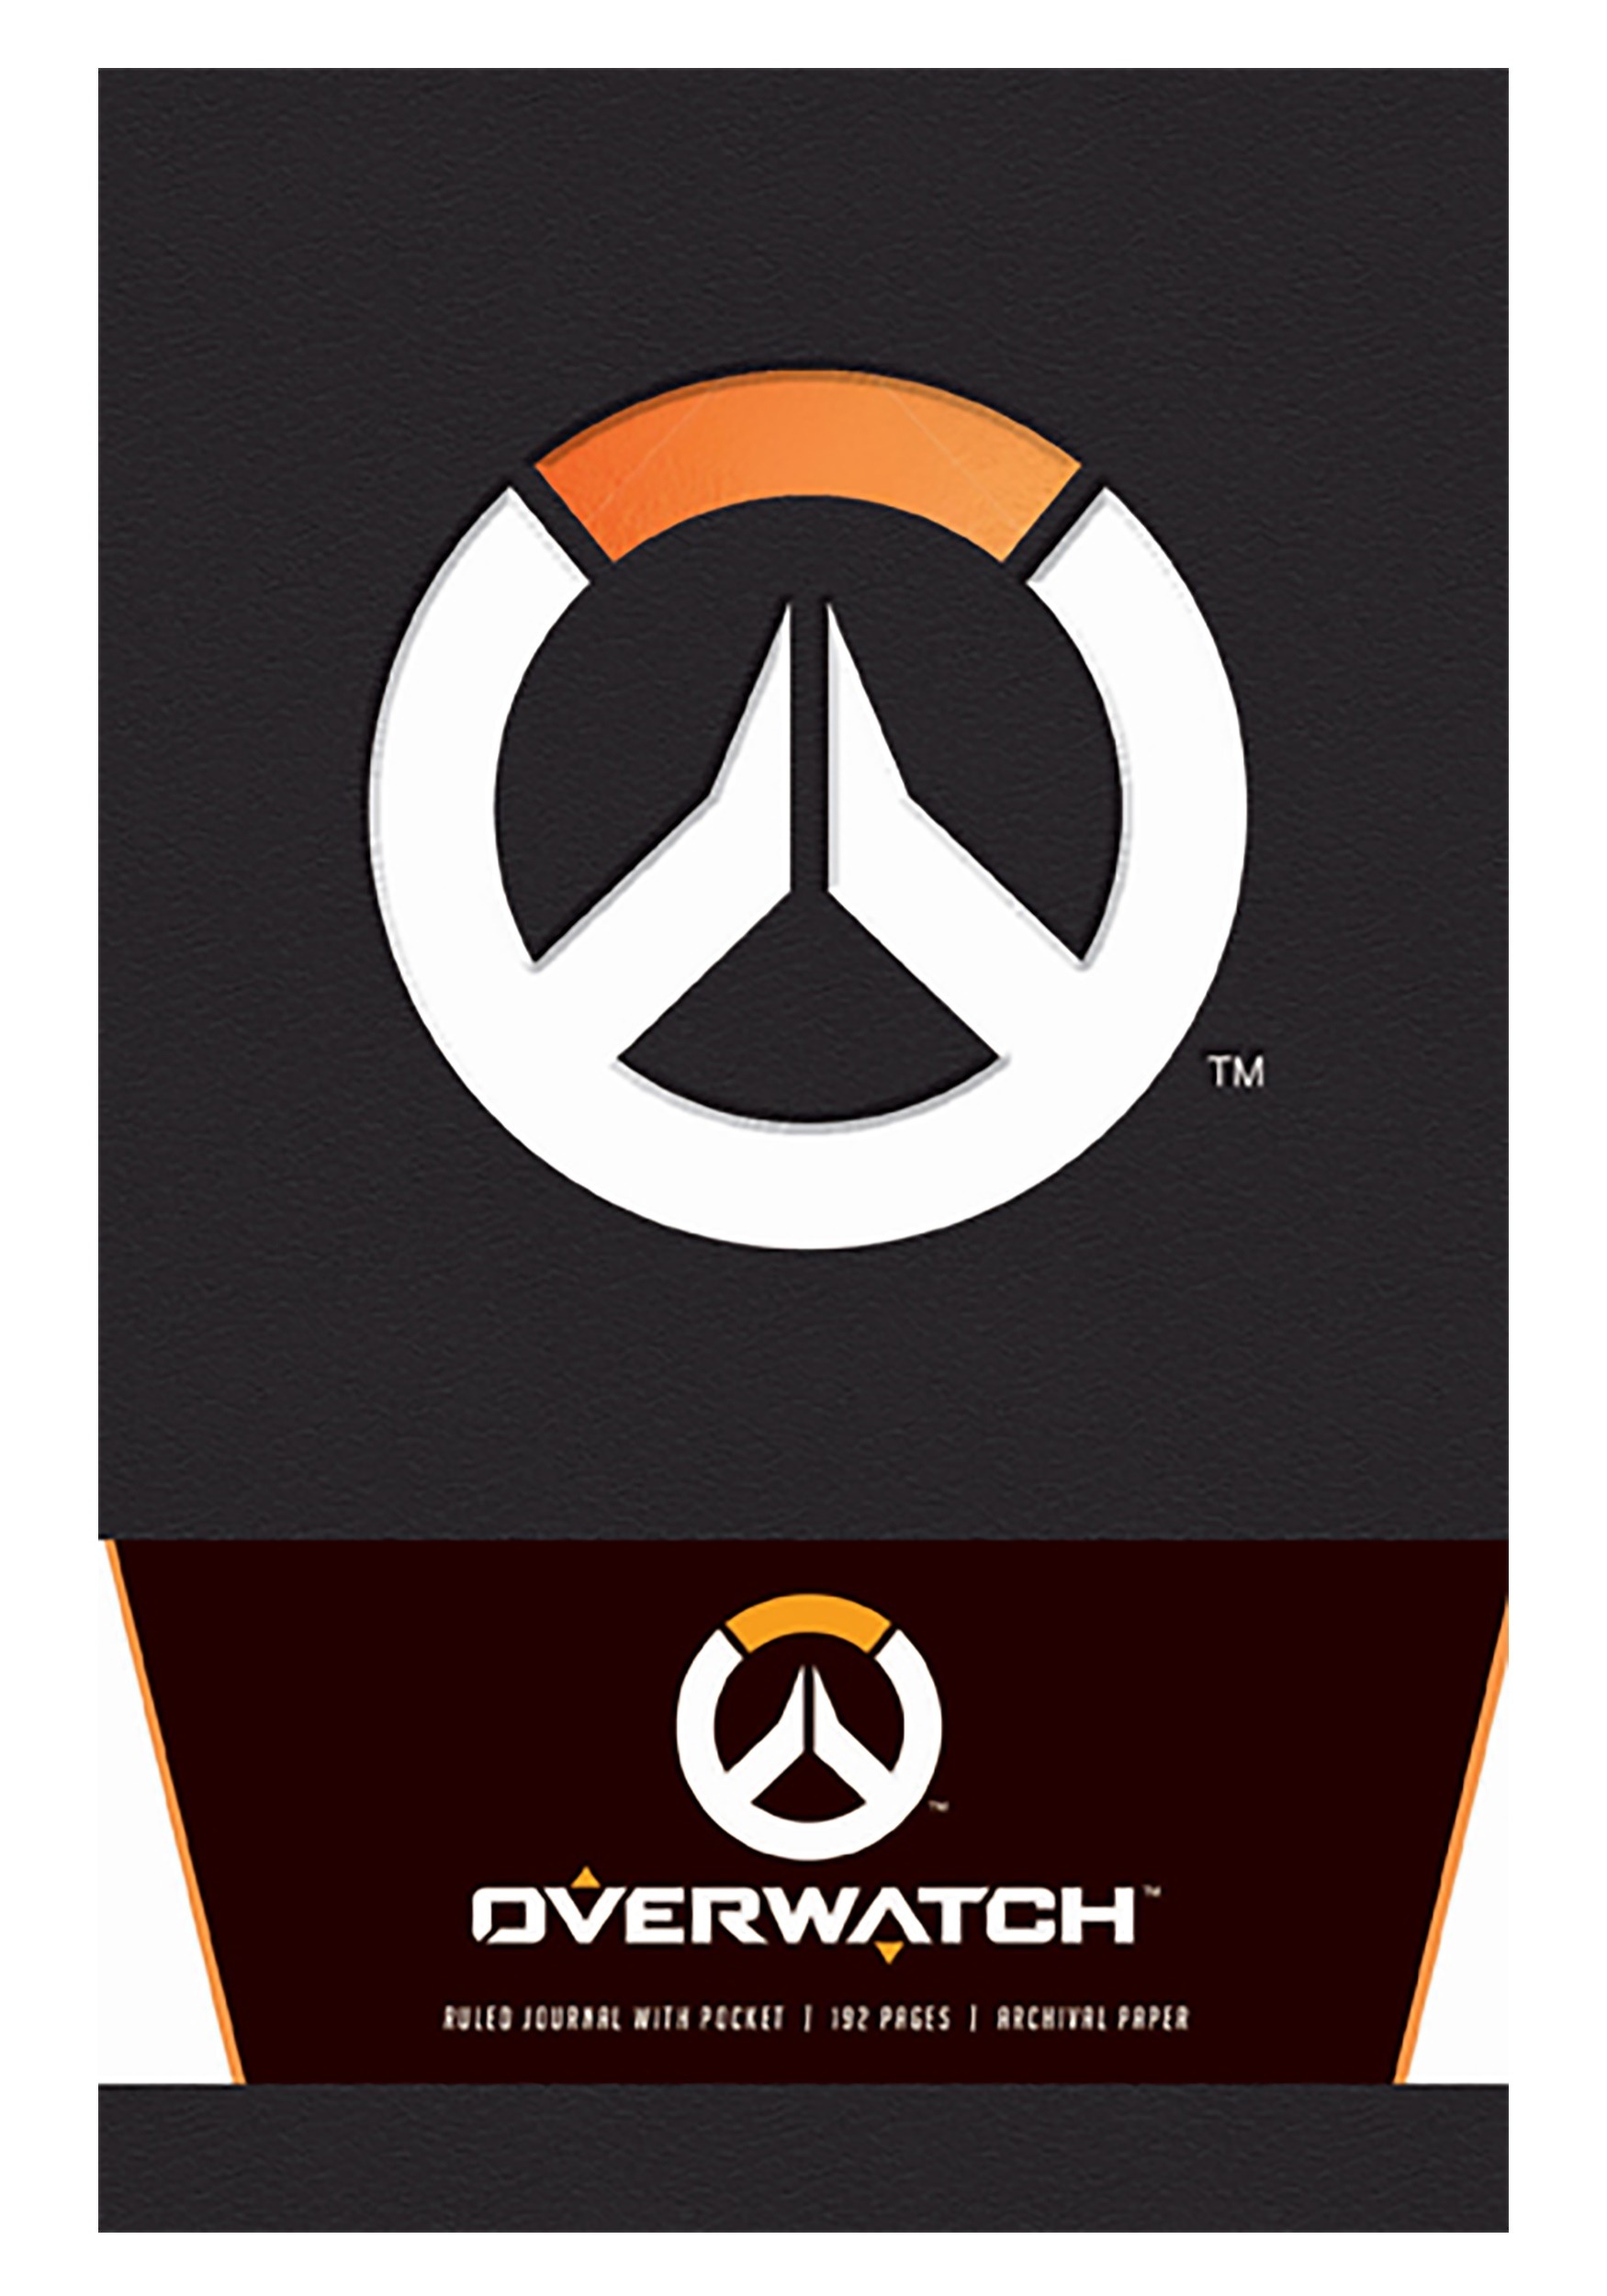 Hardcover Ruled Journal Overwatch